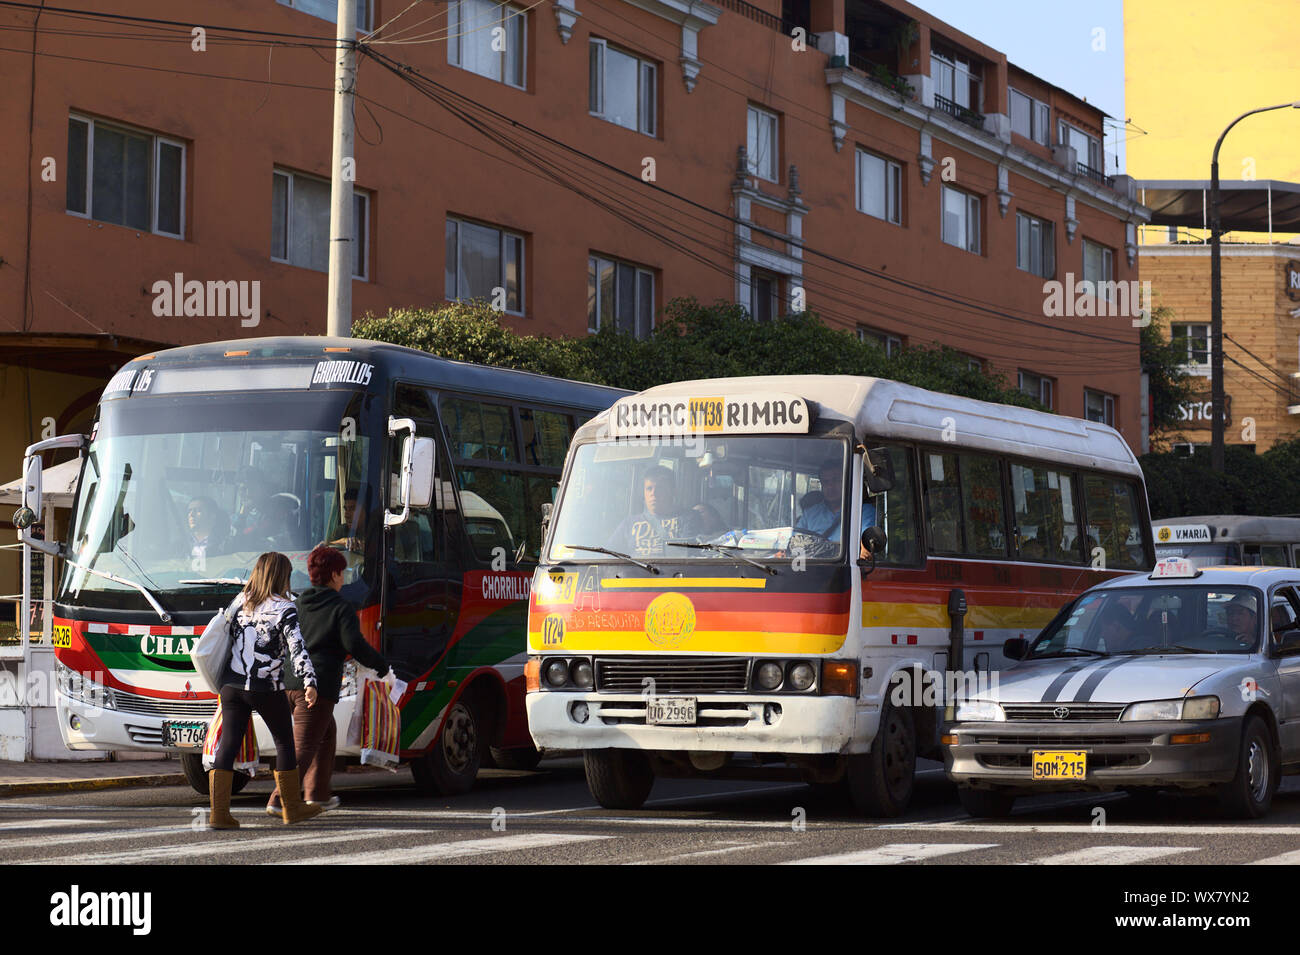 LIMA, PERU - SEPTEMBER 13, 2011: People getting into a bus at red light on Avenida Diagonal on September 13, 2011 in Miraflores, Lima, Peru Stock Photo